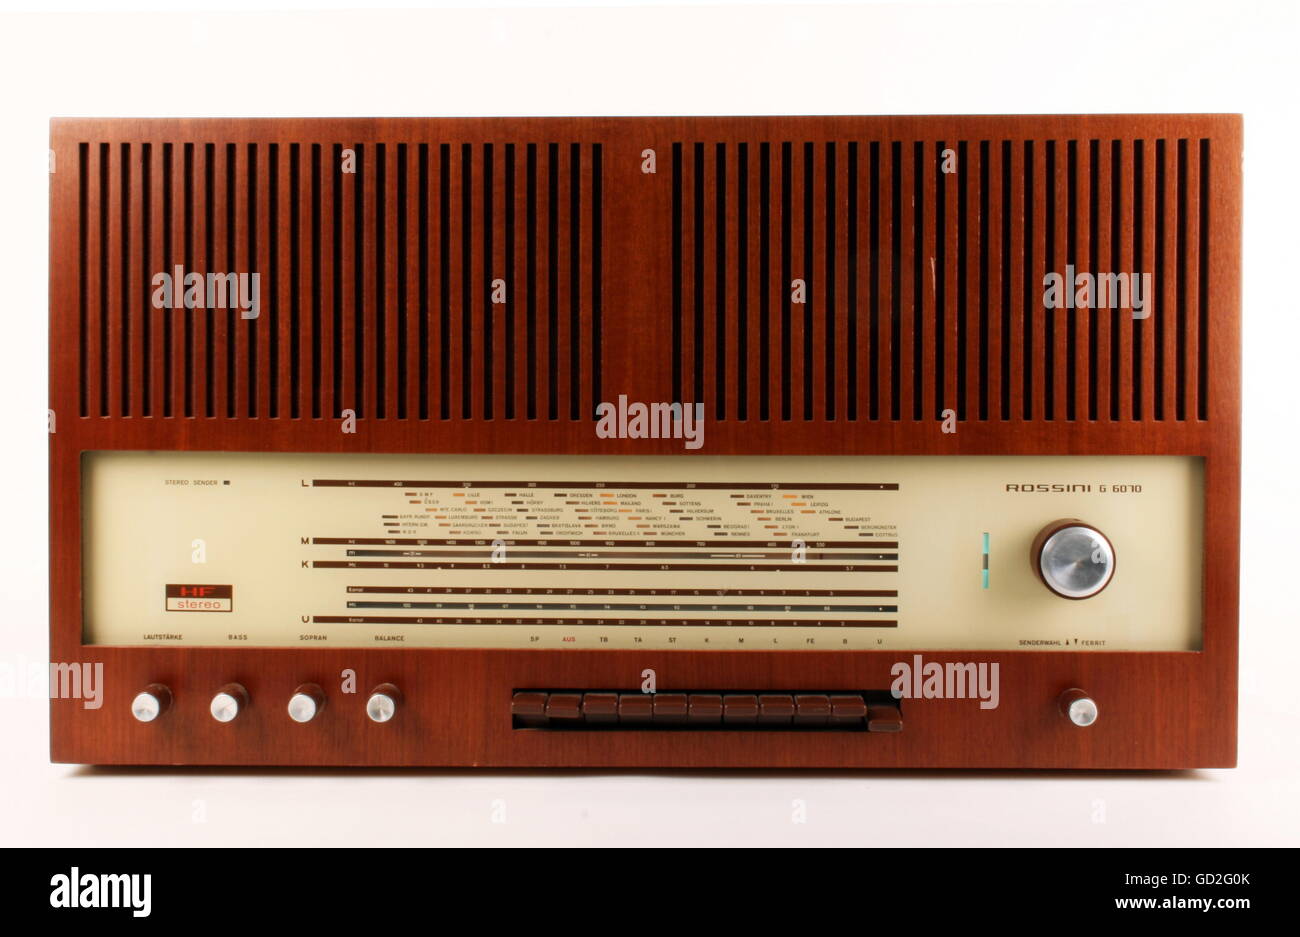 broadcast,radio,HiFi Stereo Super Rossini G 6070,design: unknown,probably design by factory,made by: VEB Goldpfeil Rundfunkgeraetewerk Hartmannsdorf,East-Germany,1968,East-Germany,East Germany,GDR,DDR,radio set,radio,radio sets,radios,radio receiver,radio receivers,consumer electronics,entertainment electronics,home electronics,home entertainment,broadcast receiver,broadcast receivers,broadcast electronics,electric appliance,electrical device,electric appliances,electrical devices,electrical,electric,unit,units,device,devices,,Additional-Rights-Clearences-Not Available Stock Photo